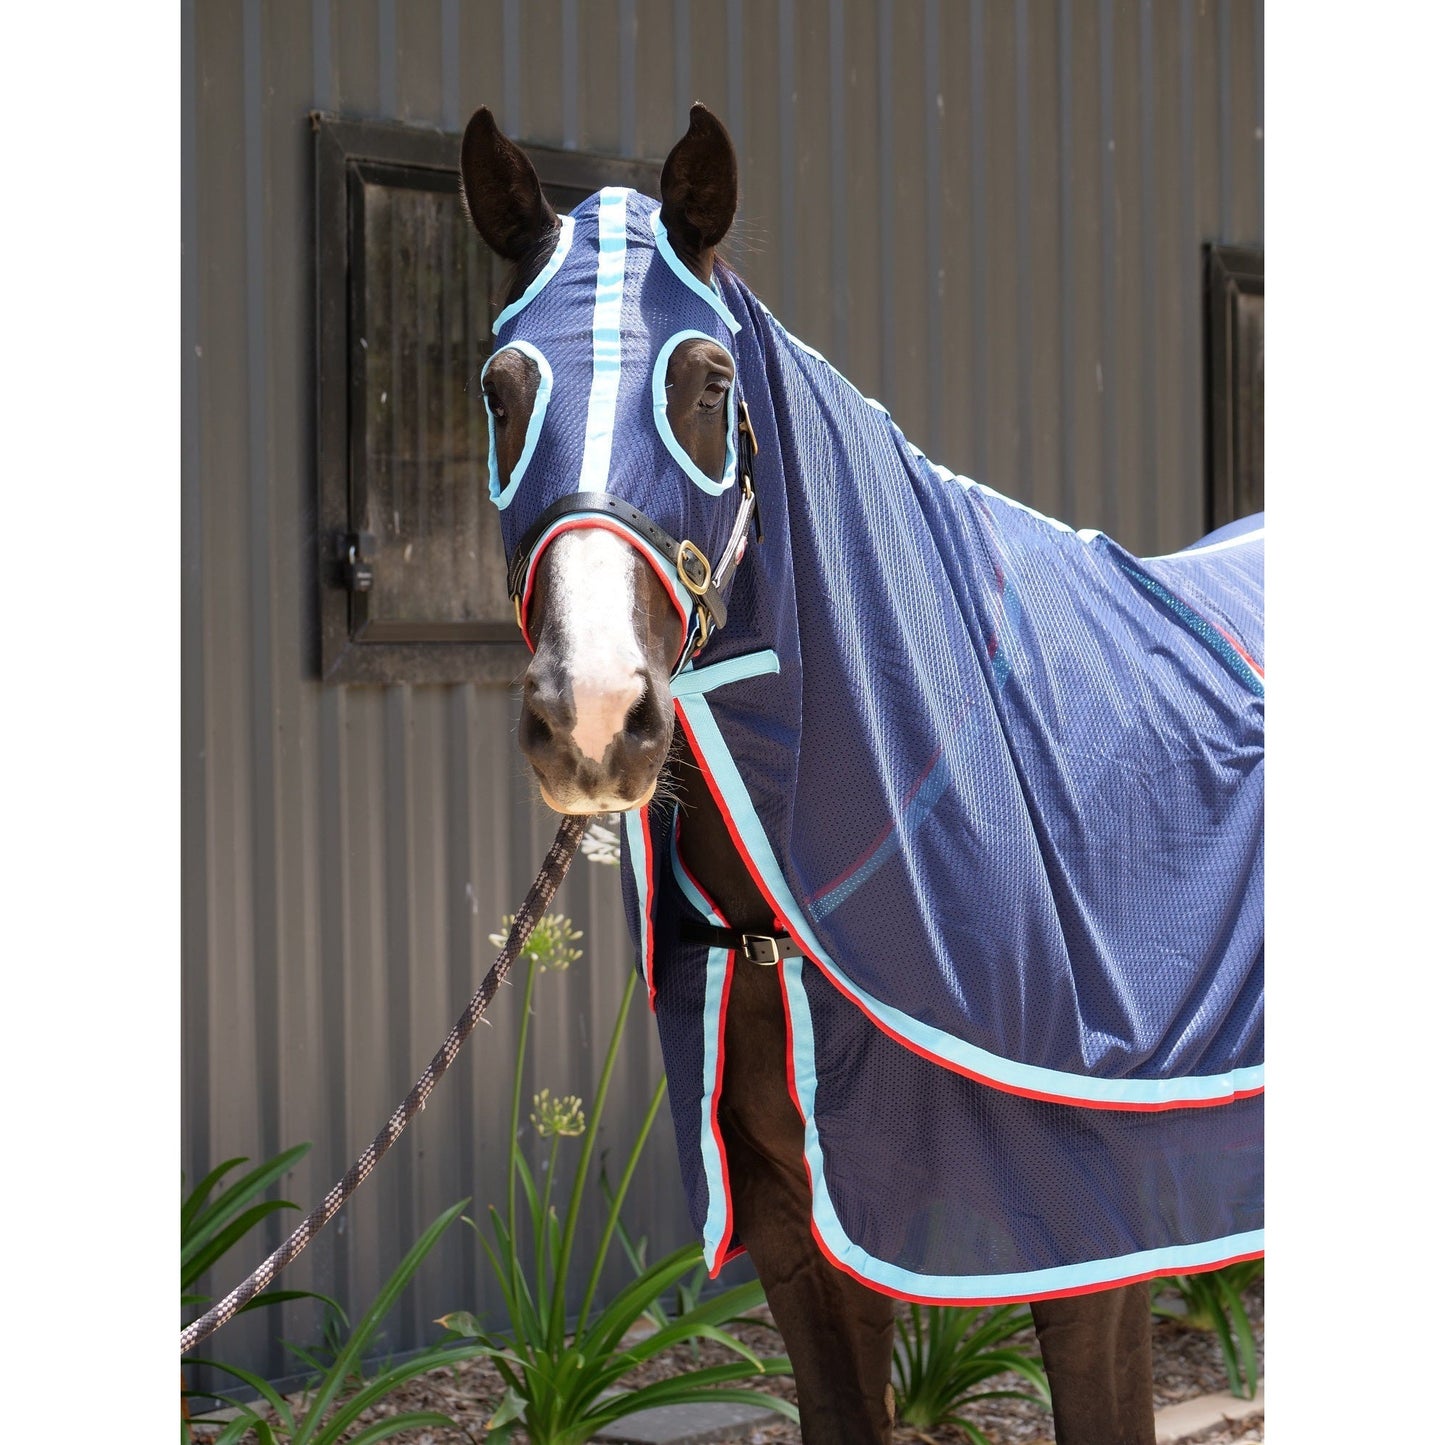 Horse in blue-striped show rug standing next to metal building.